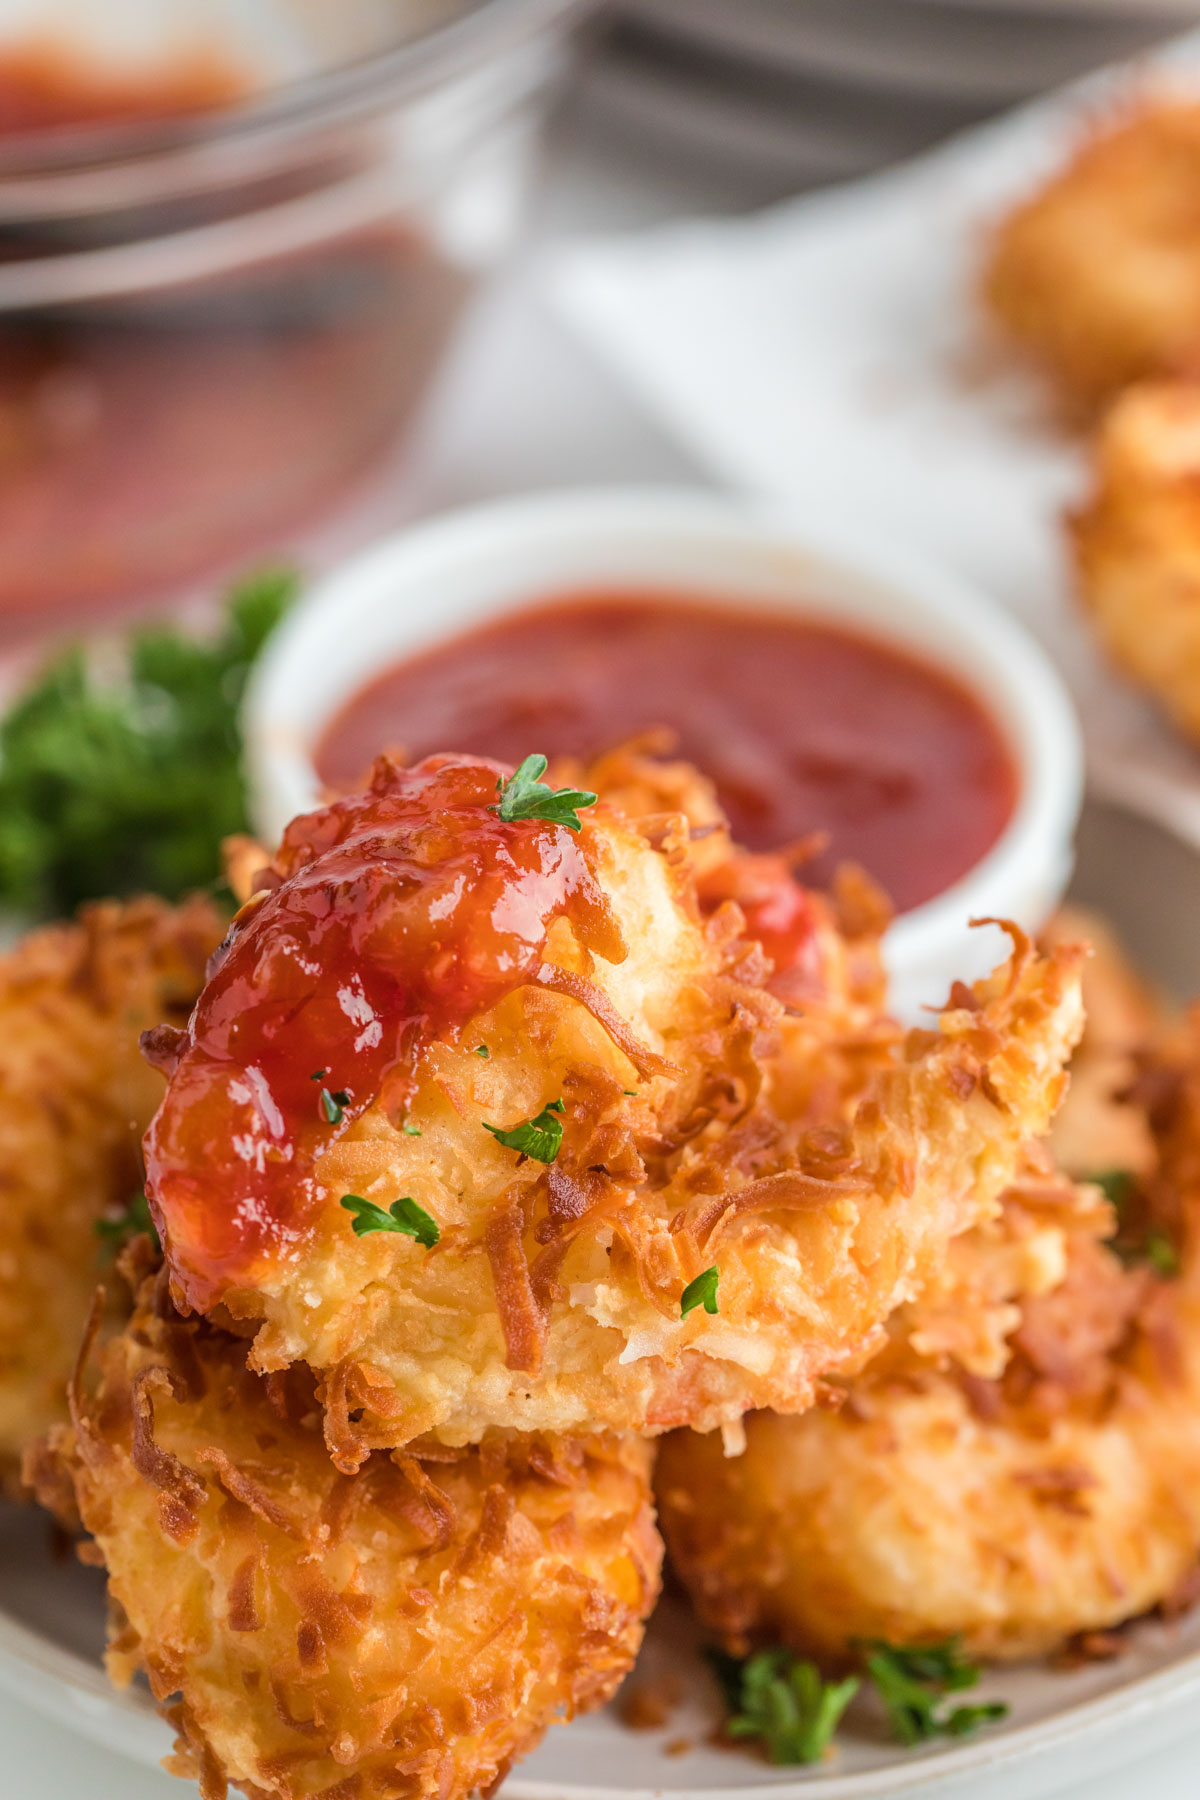 coconut shrimp on. aplatter with a dish of a red sauce.